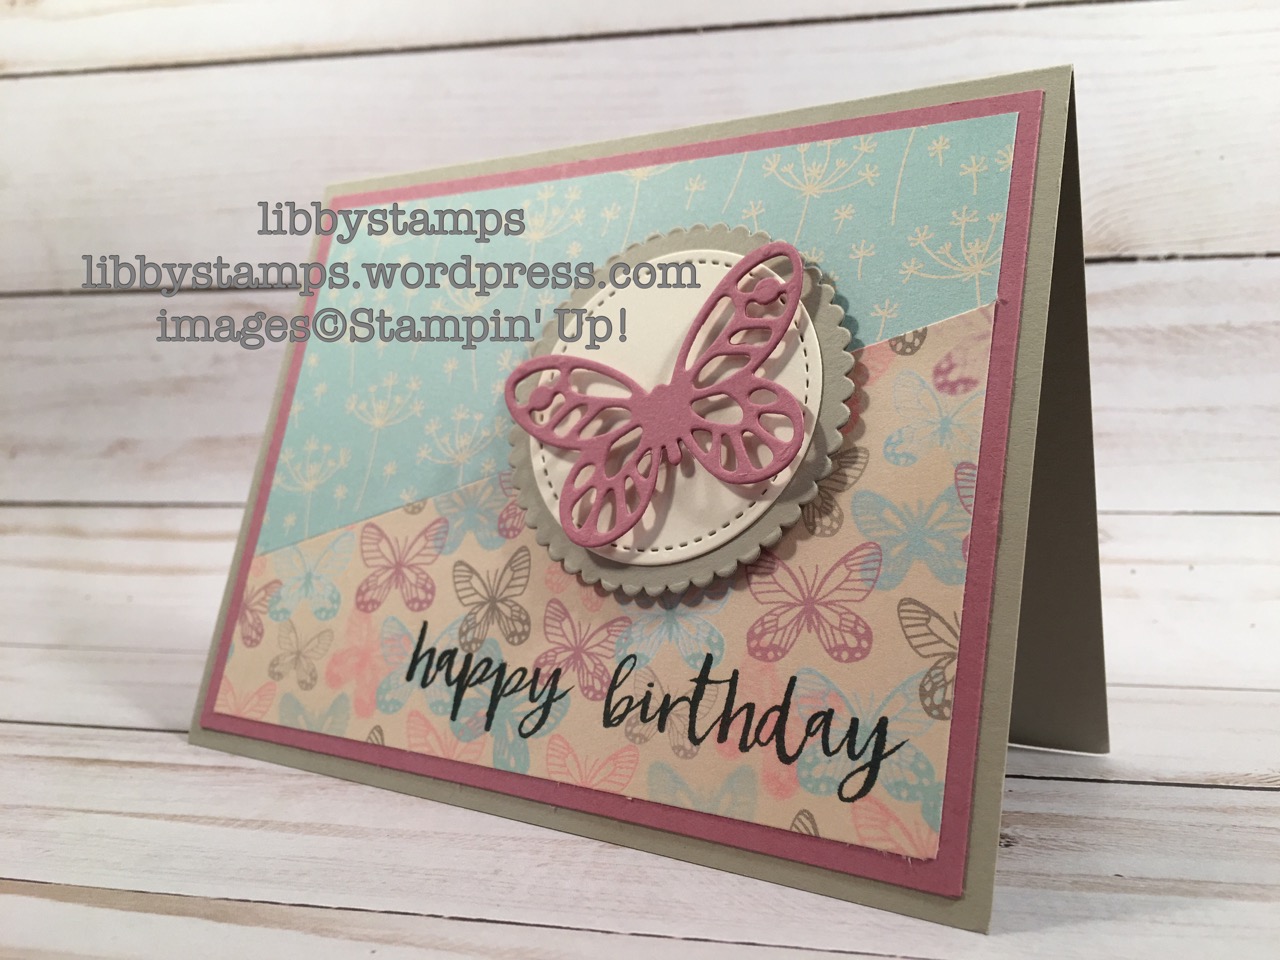 libbystamps, stampin up, Milestone Moments, Bold Butterflies Framelits, Layering Circles Framelits, Stitched Shapes Framelits, Falling in Love DSP, Card Buffet, SGGW